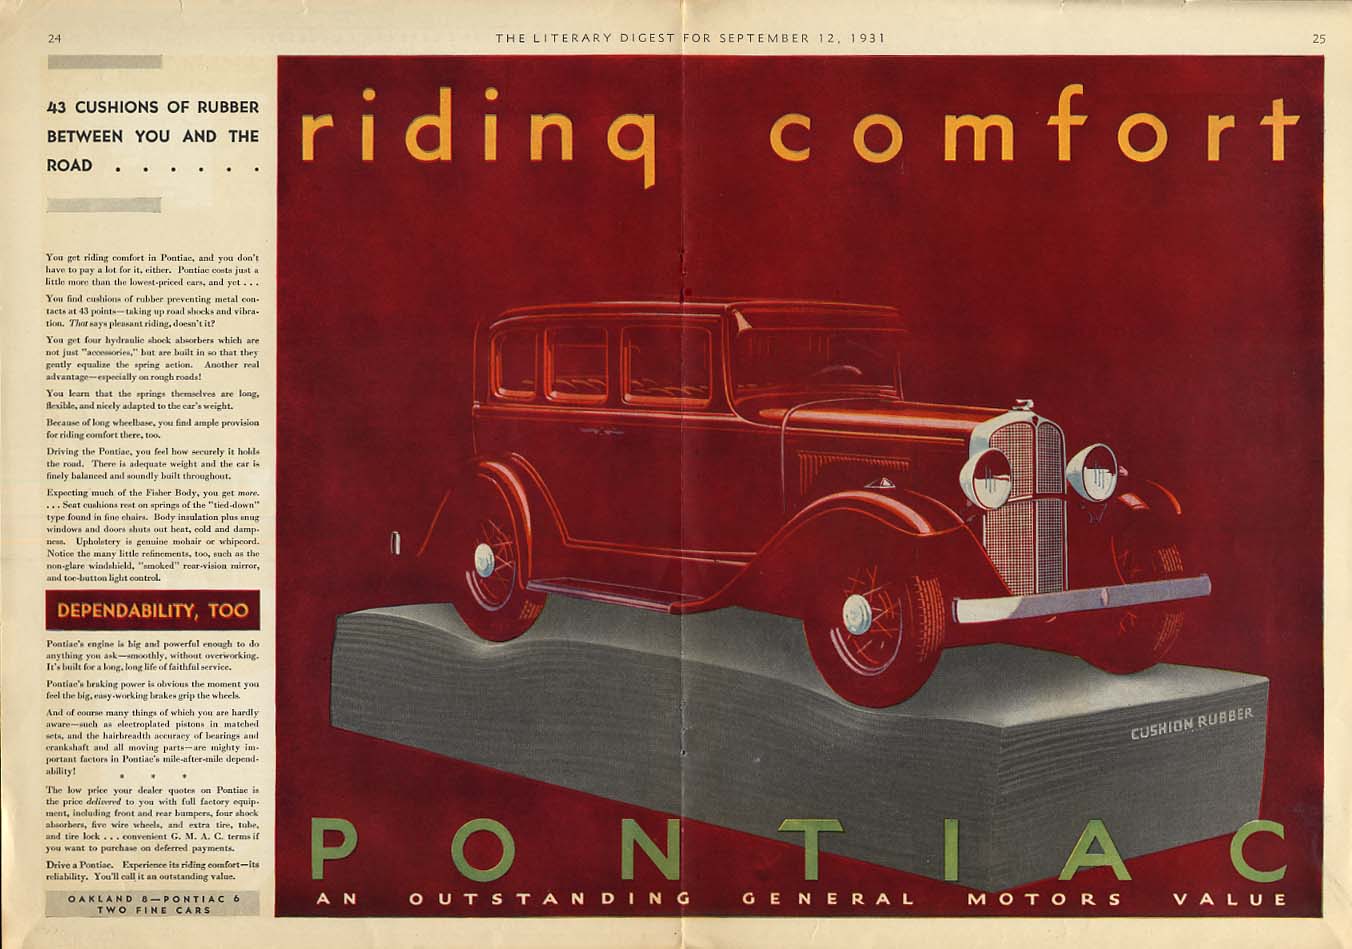 Image for 43 Cushions of Rubber for Riding Comfort - Pontiac 4-door sedan ad 1931 LD